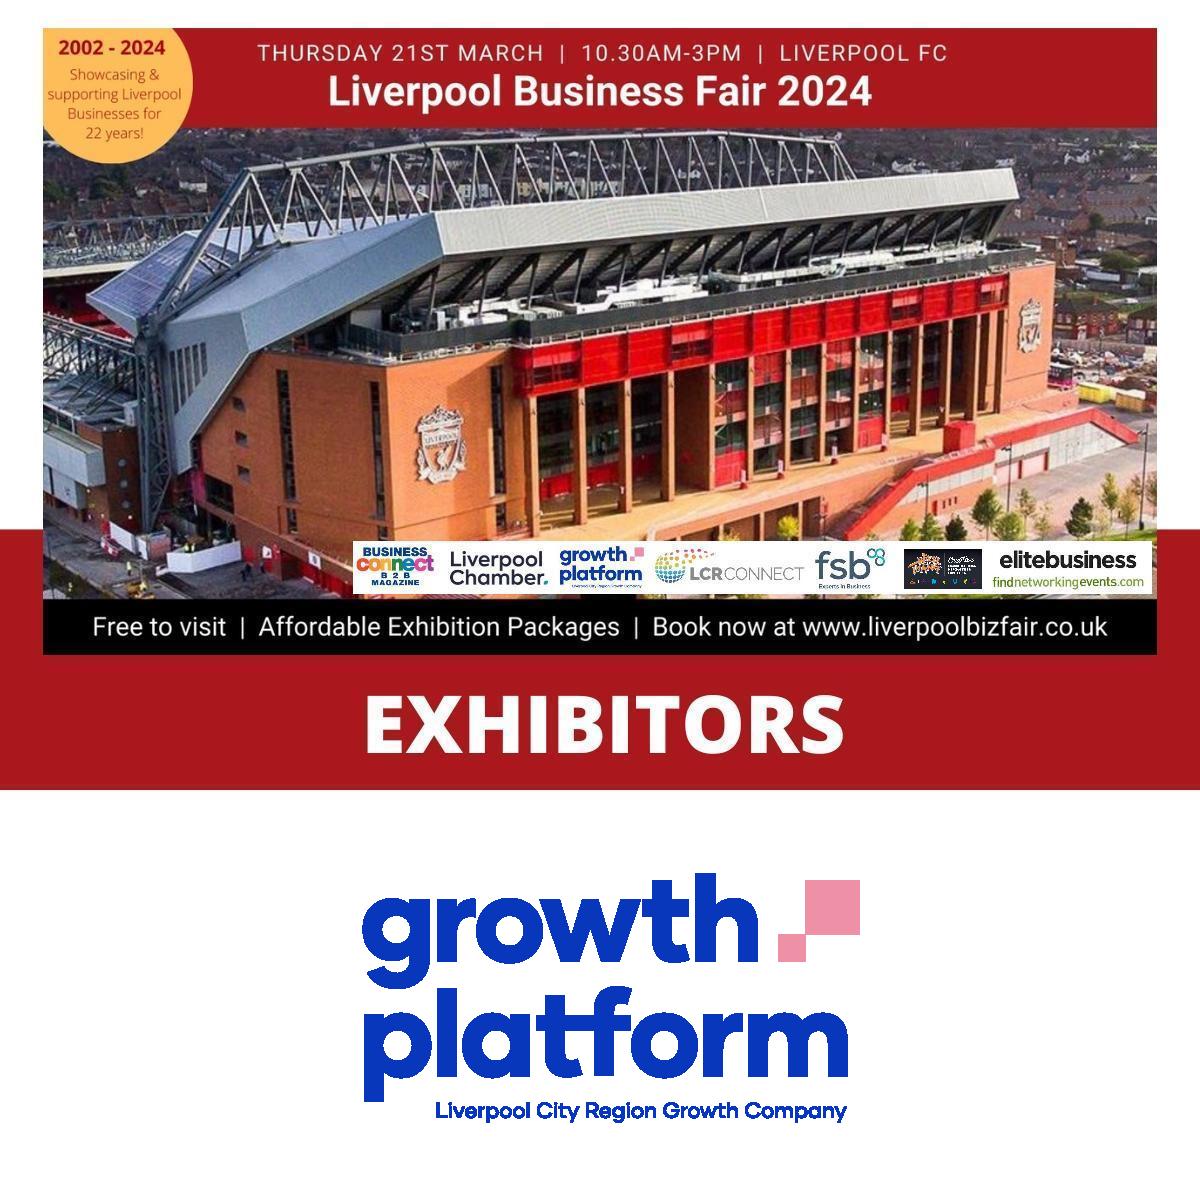 Growth Platform is Liverpool City Region’s growth company, designed to support people and businesses to realise their potential and generate growth - talk to them at #LiverpoolBizFair at #LFC on Thurs 21 March @GrowthPlatform_ | @LpoolCityRegion liverpoolbizfair2024.eventbrite.co.uk